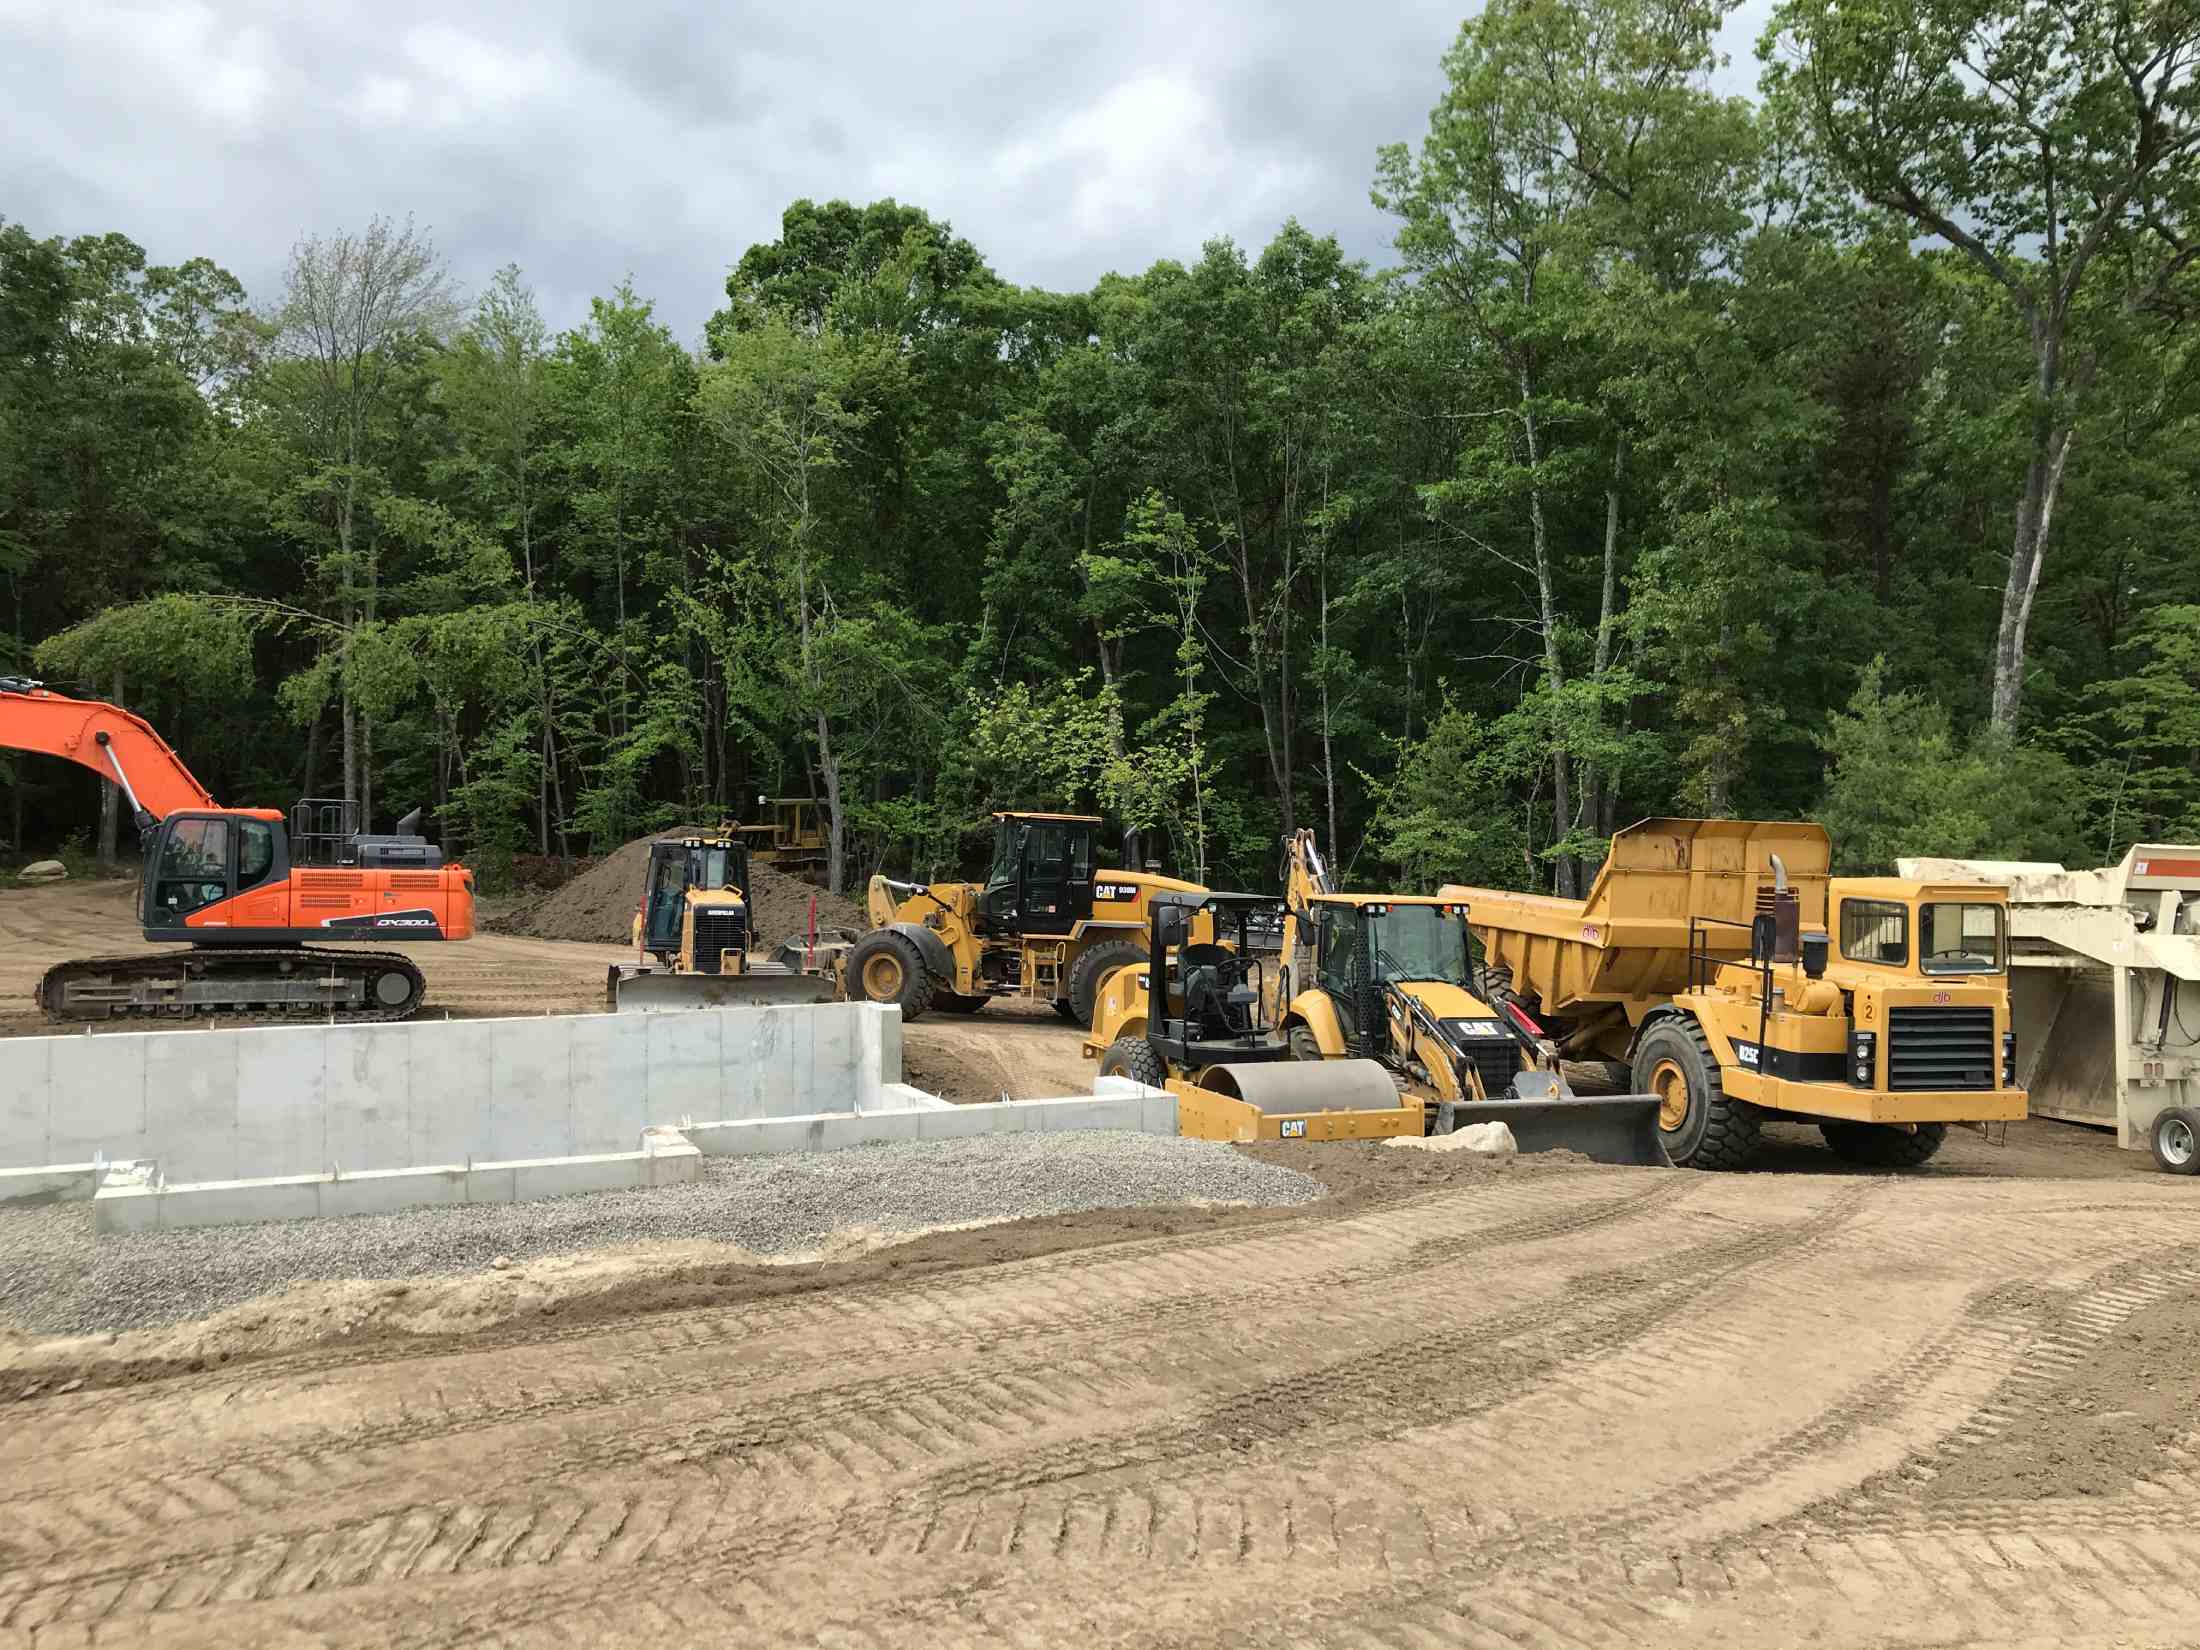 Six construction equipment trucks working on a construction site